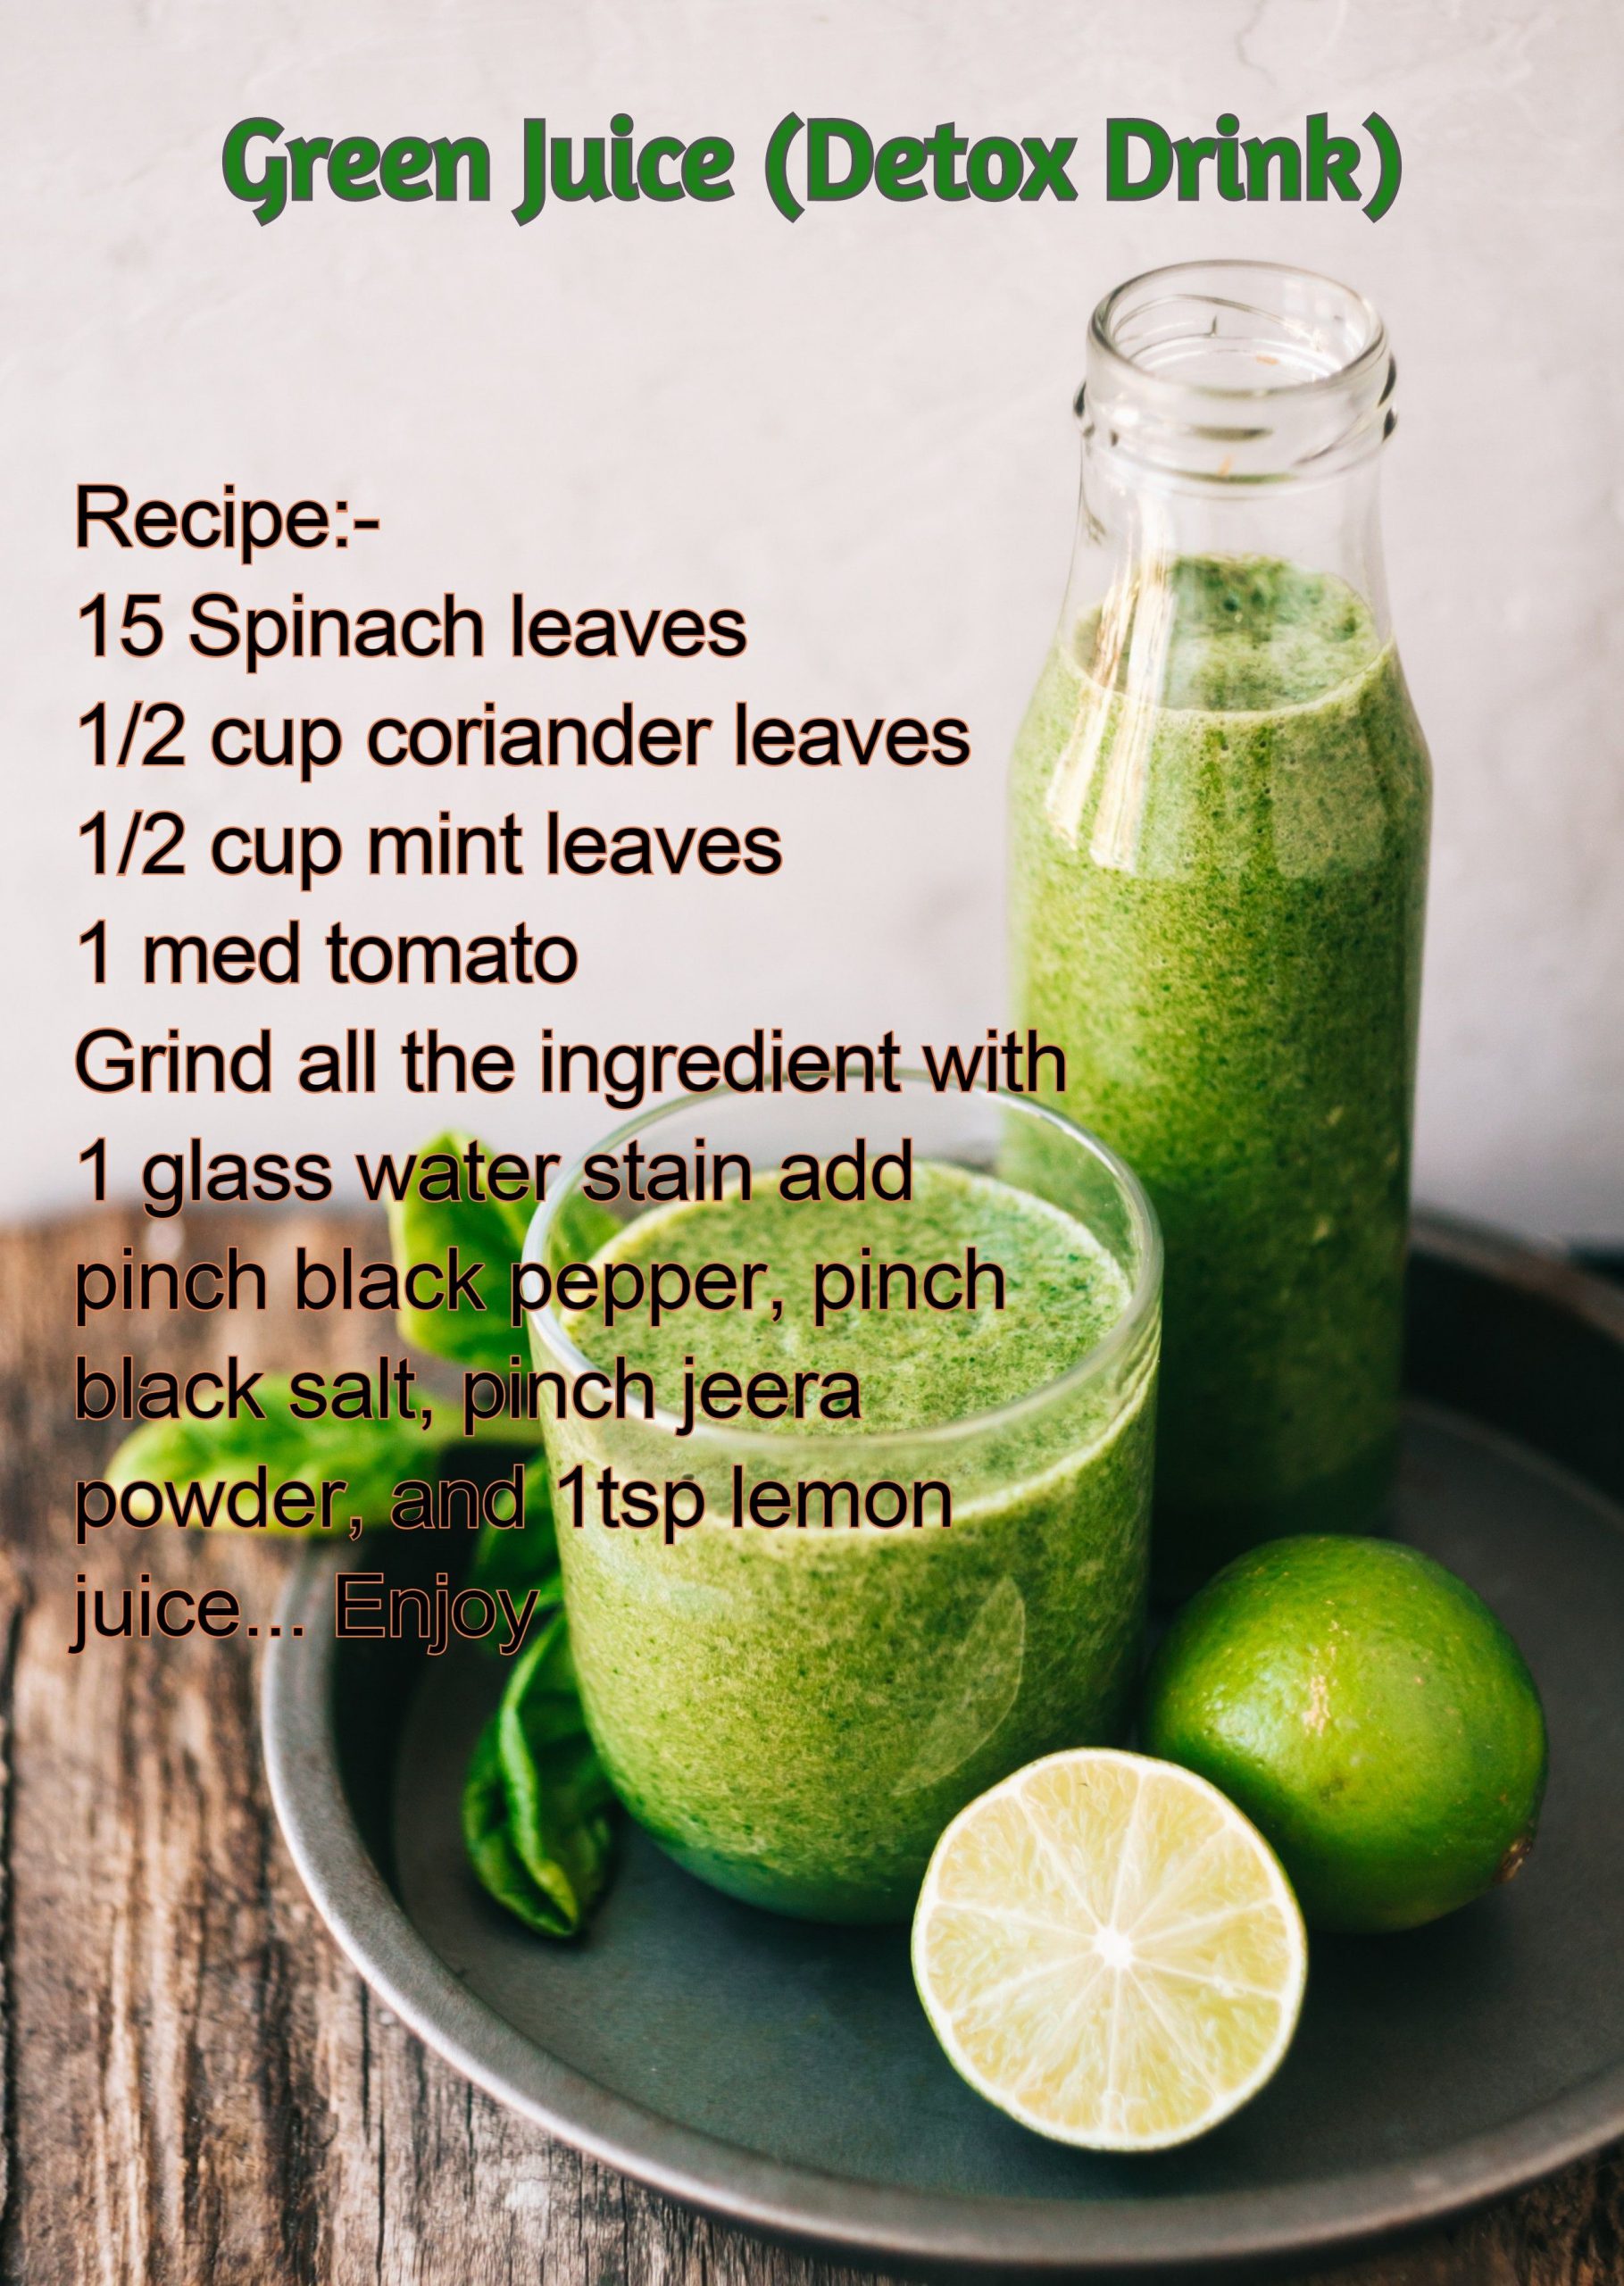 How to make Green juice( Detox Drink)